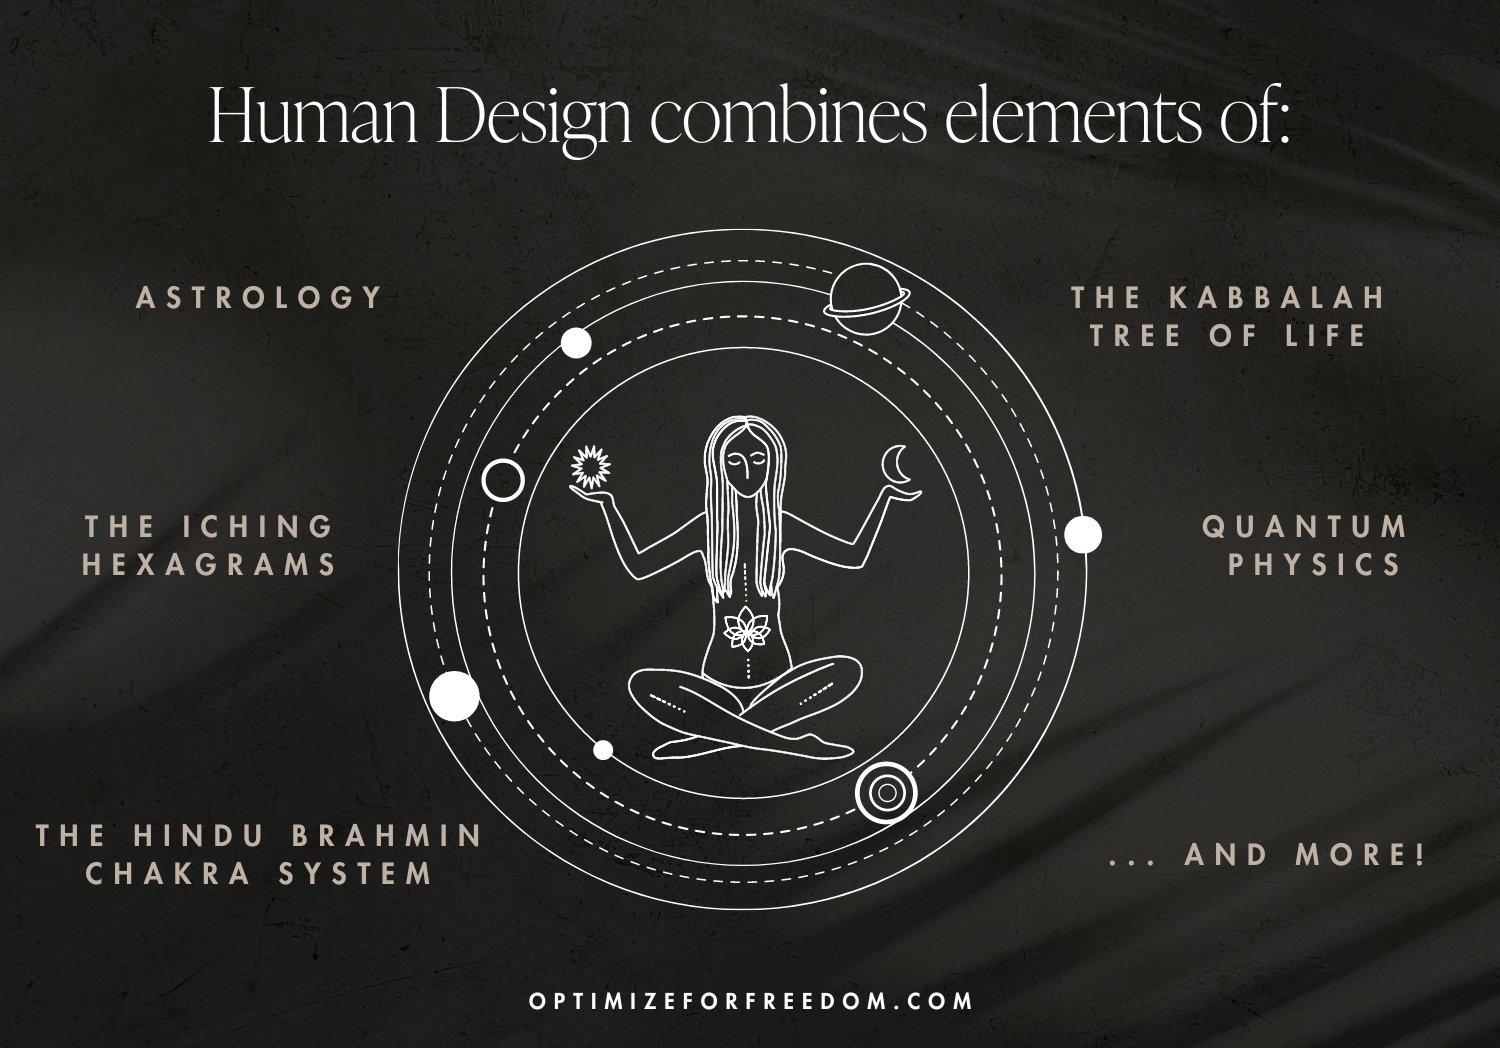 Human Design combines elements of astrology, the Kabbalah Tree of Live, the IChing hexagrams, the Hindu Brahmin chakra system and quantum physics